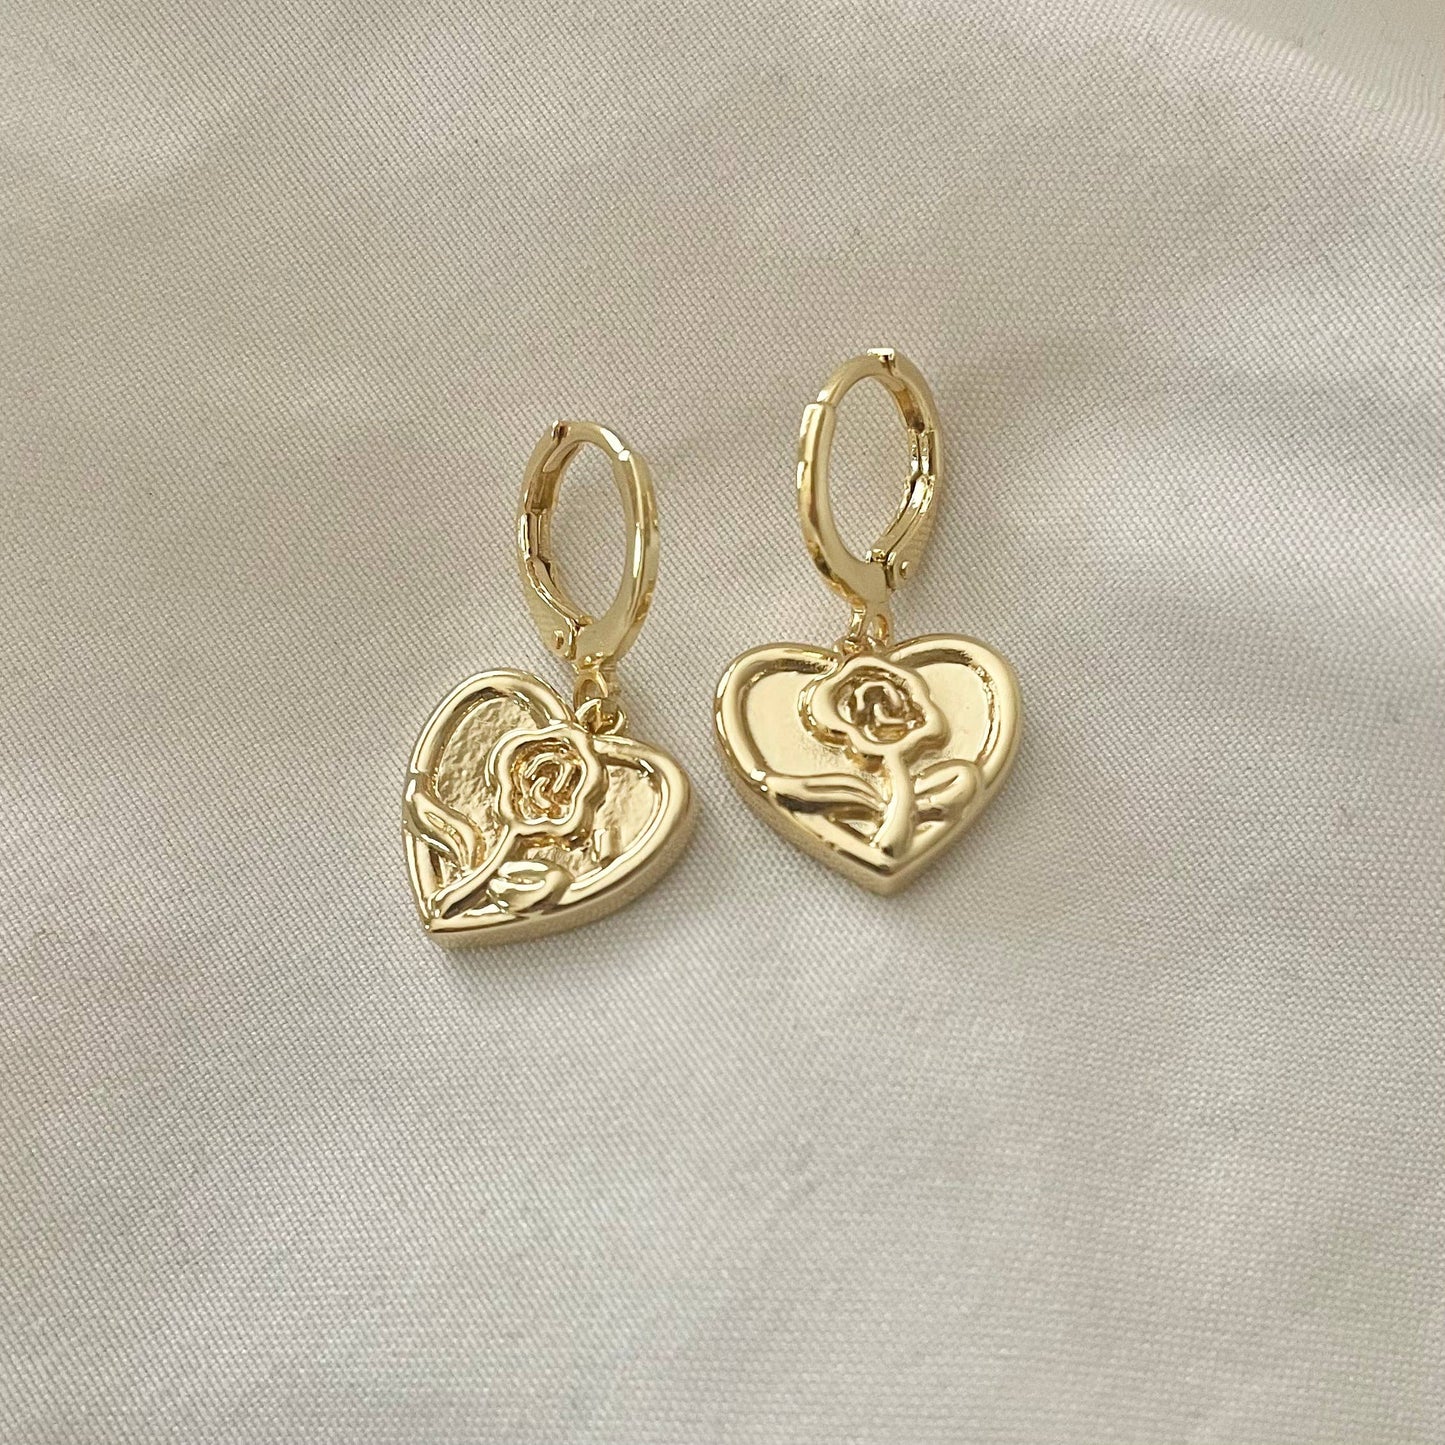 Your Song Gold Rose Heart Huggie Earrings. Small Hoops